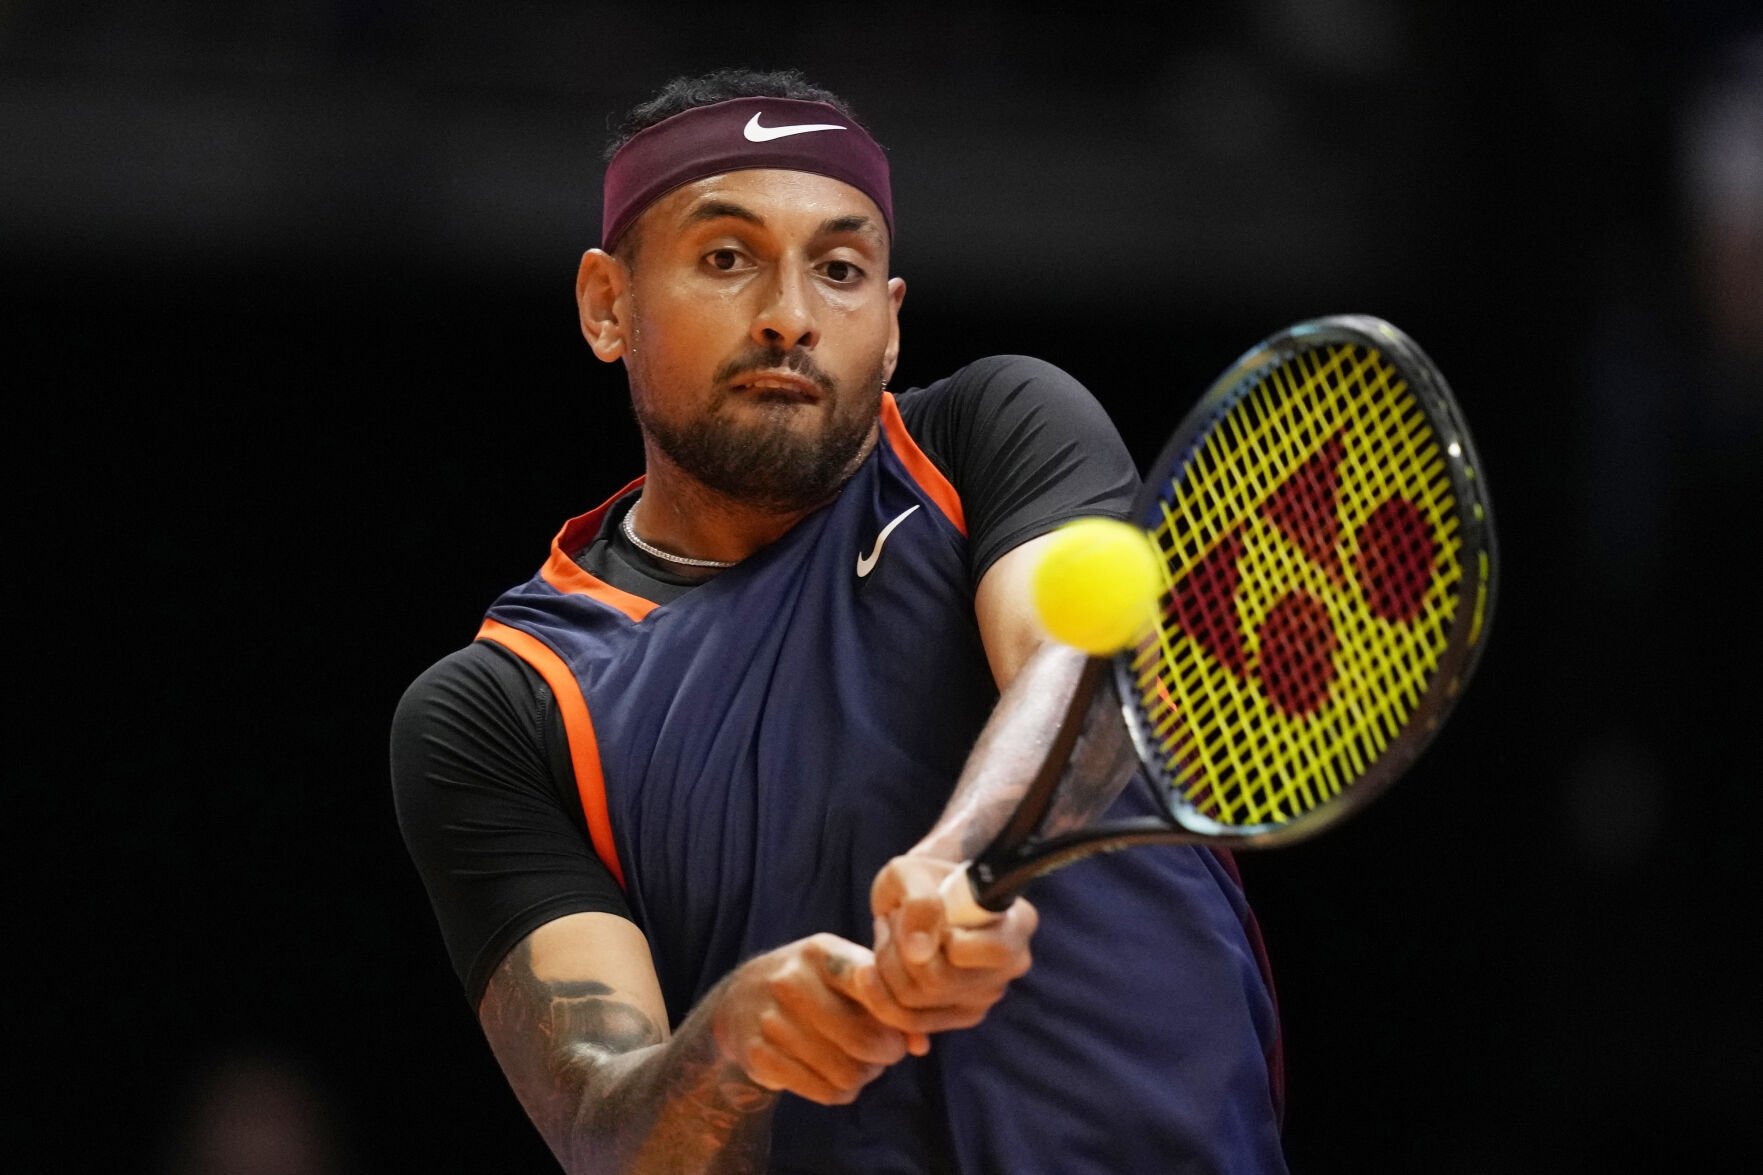 Kyrgios pulled out of the US Open